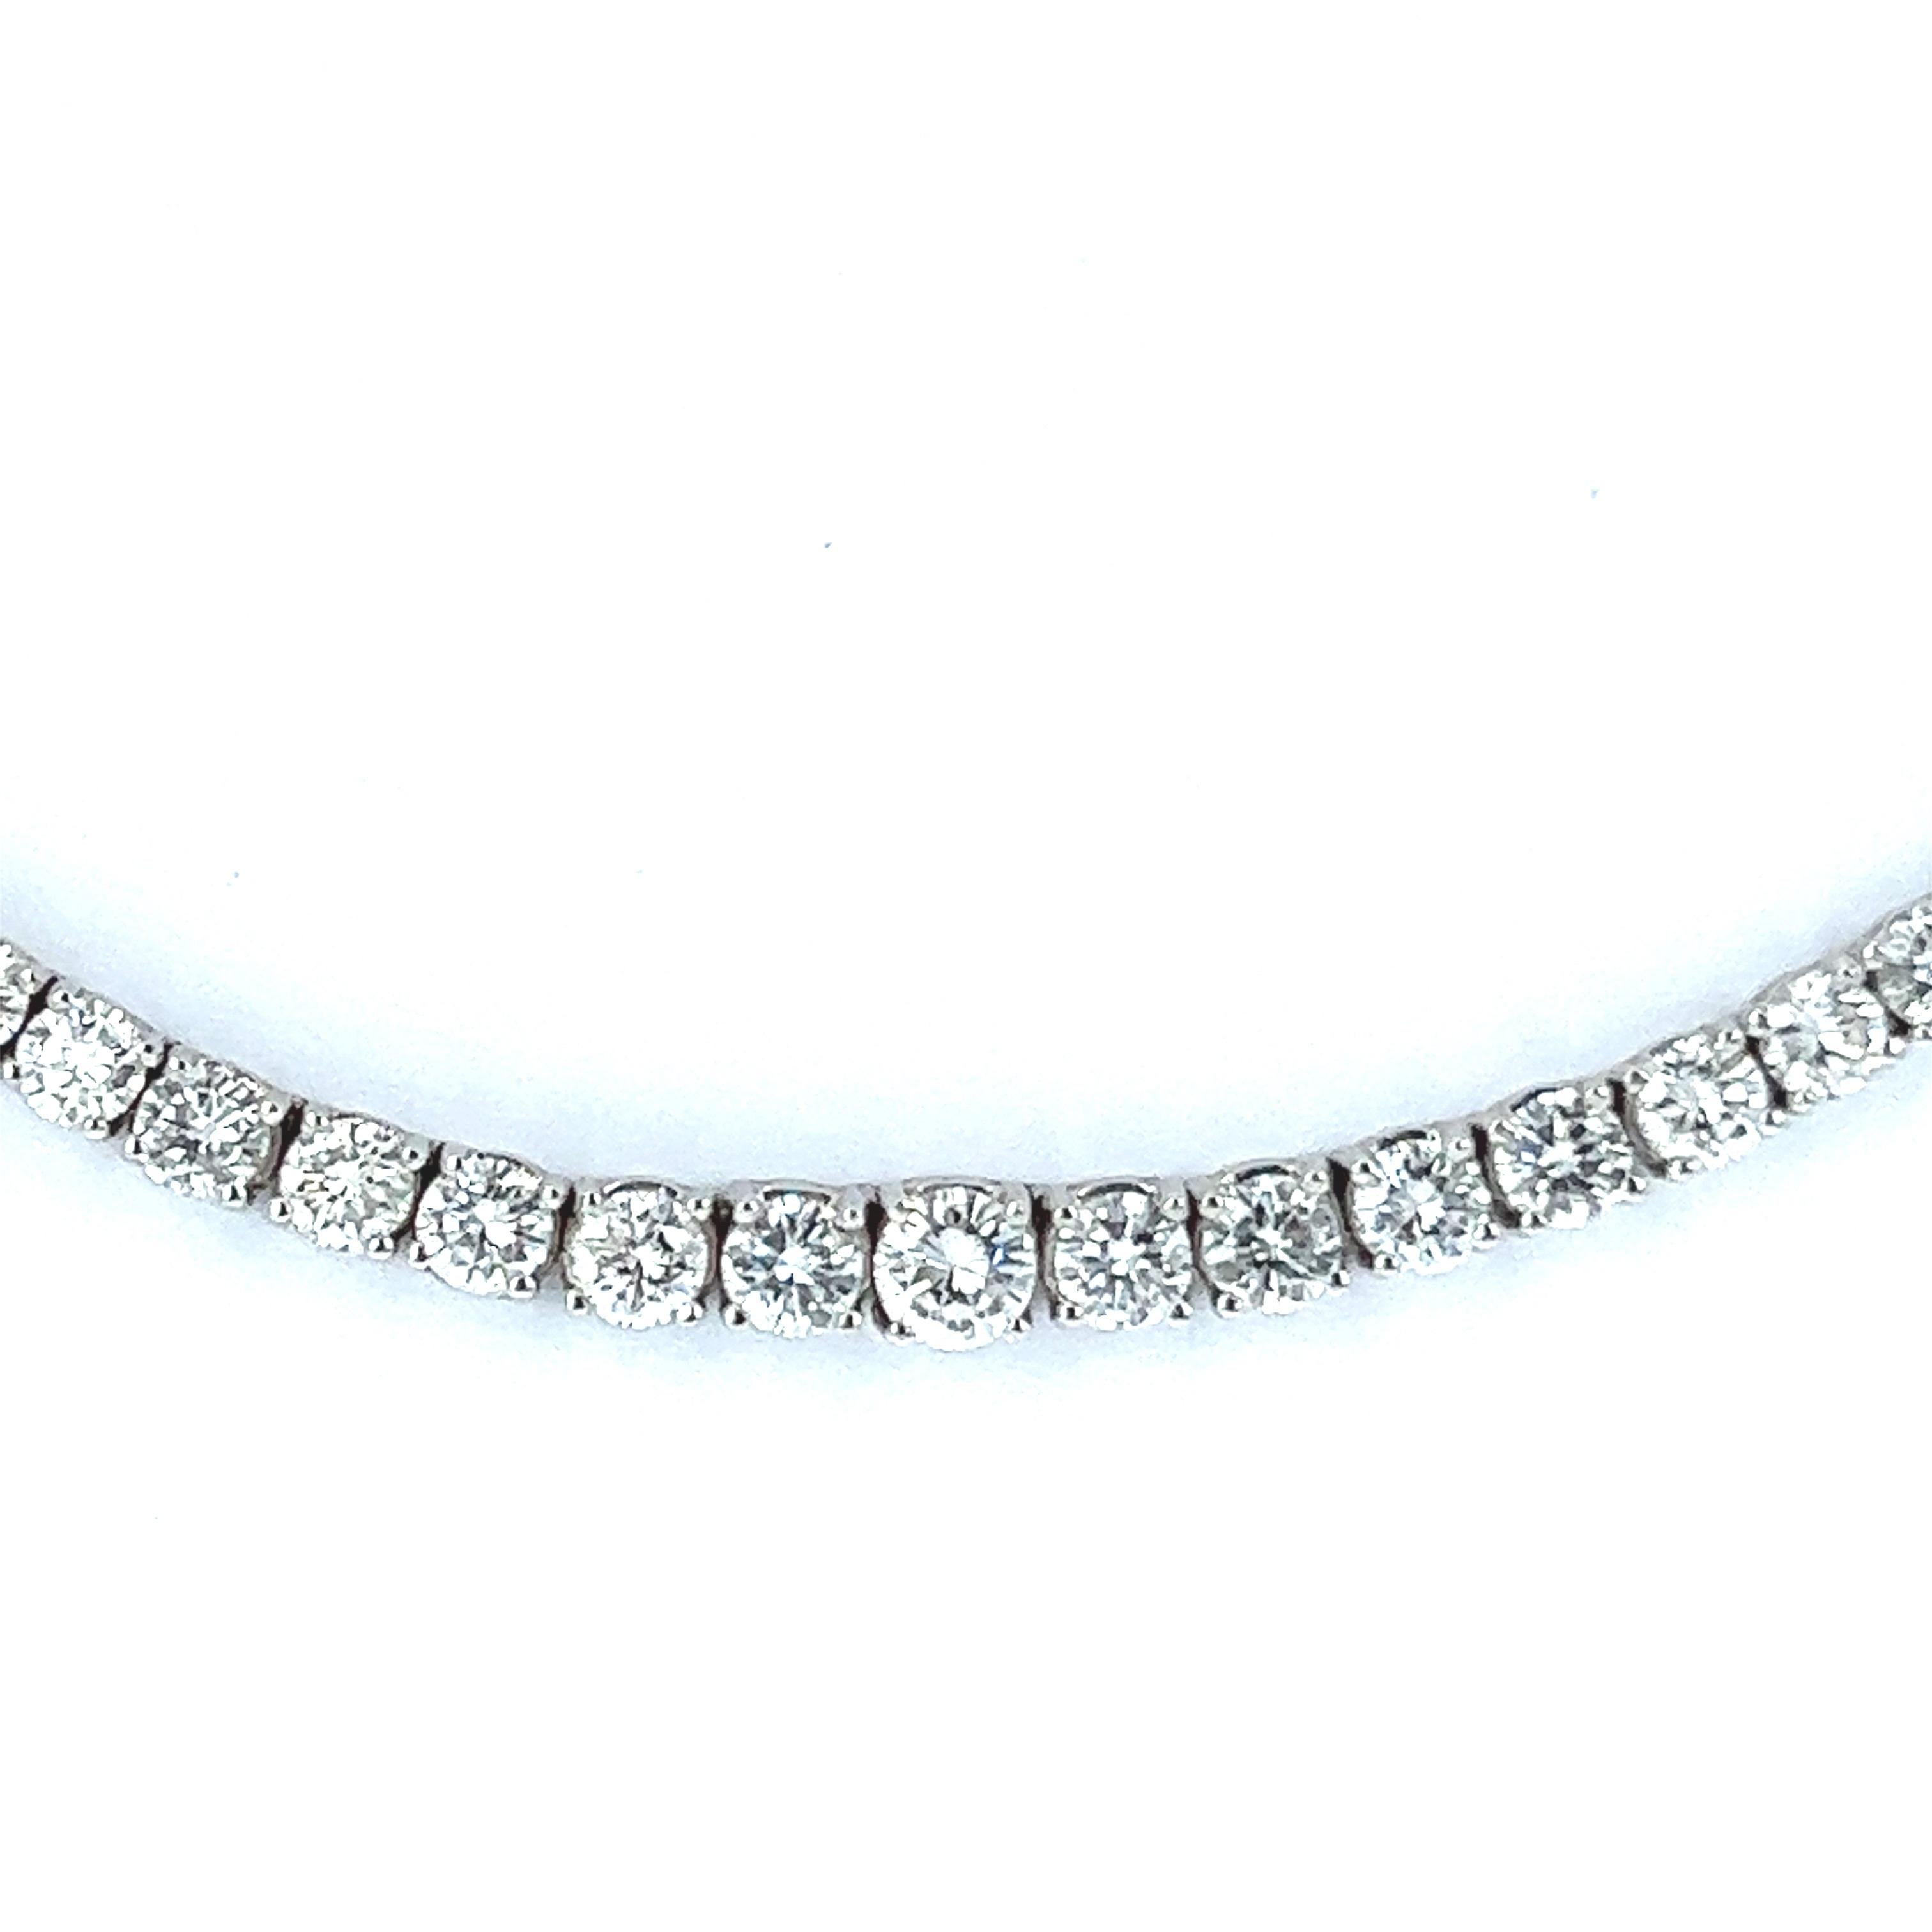 Very little compares to the beauty of a fine diamond necklace. Simple yet timeless, it is possibly one of the most charming gift that will never go out of style.

This elegant necklace is crafted in 18K white gold in a so-called 